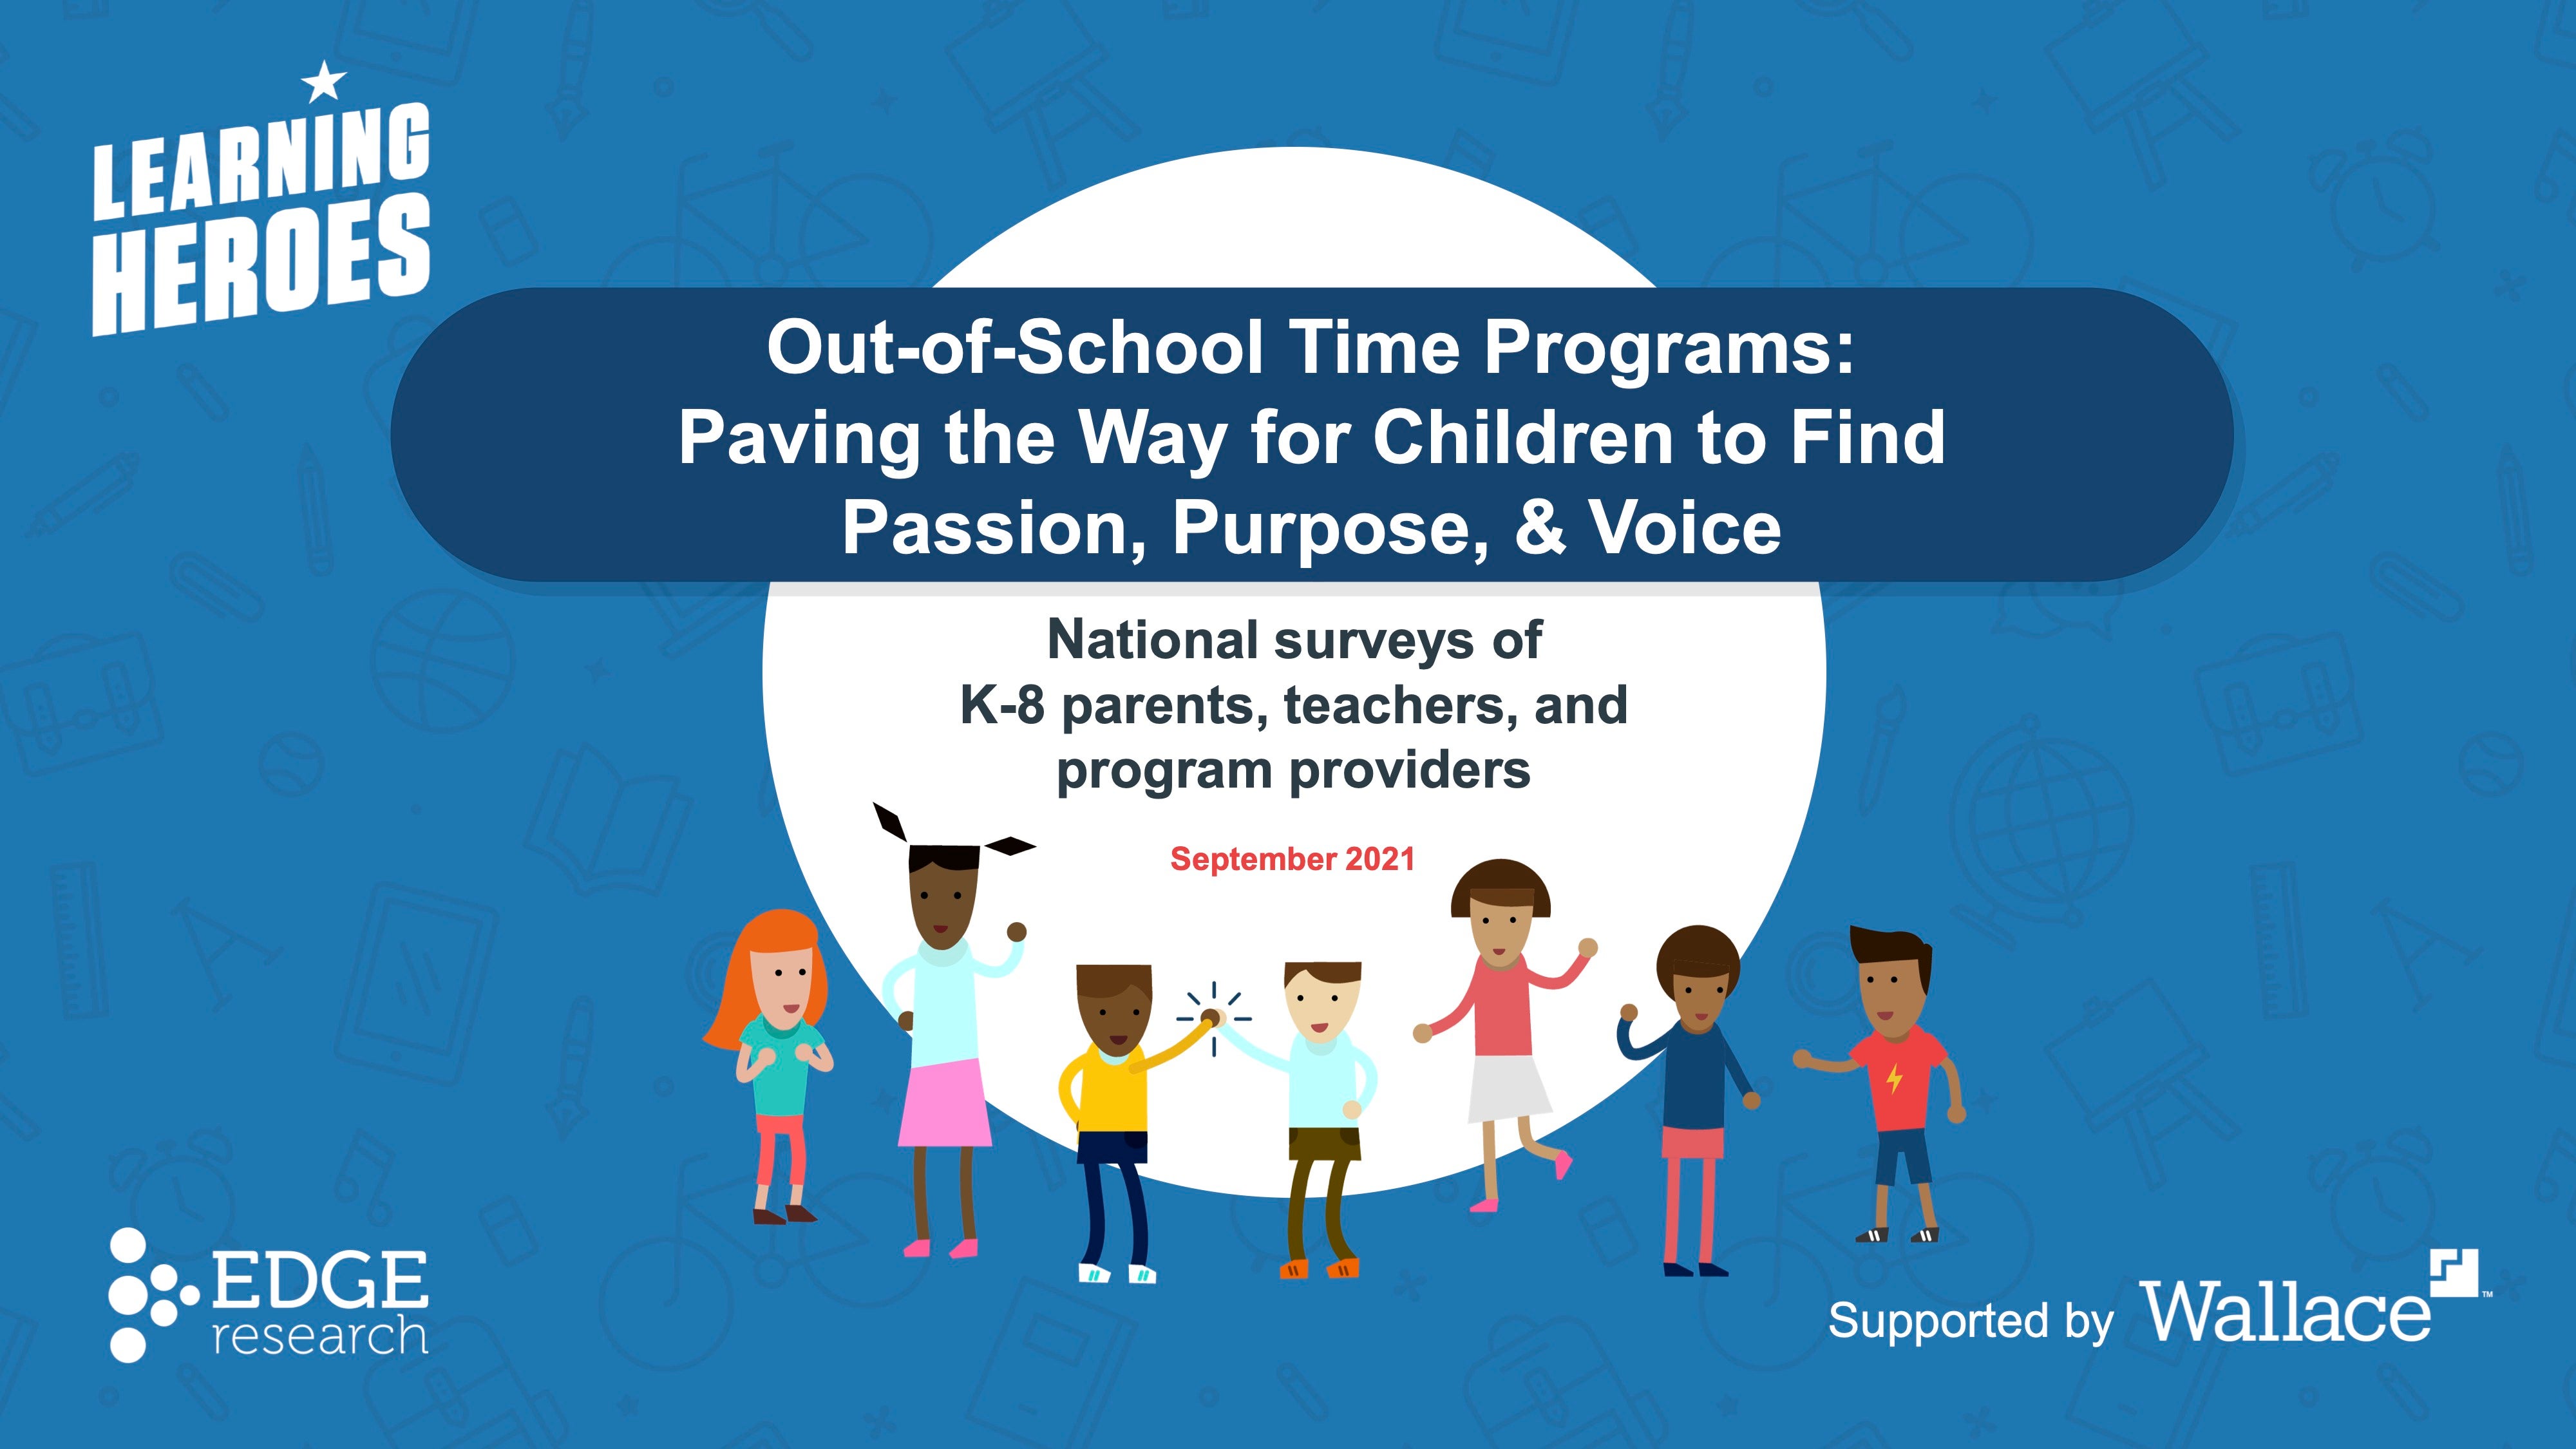 Cover page of report showing illustrated children under the heading: "Out-of-School Time Programs: Paving the Way for Children to Find Passion, Purpose & Voice"